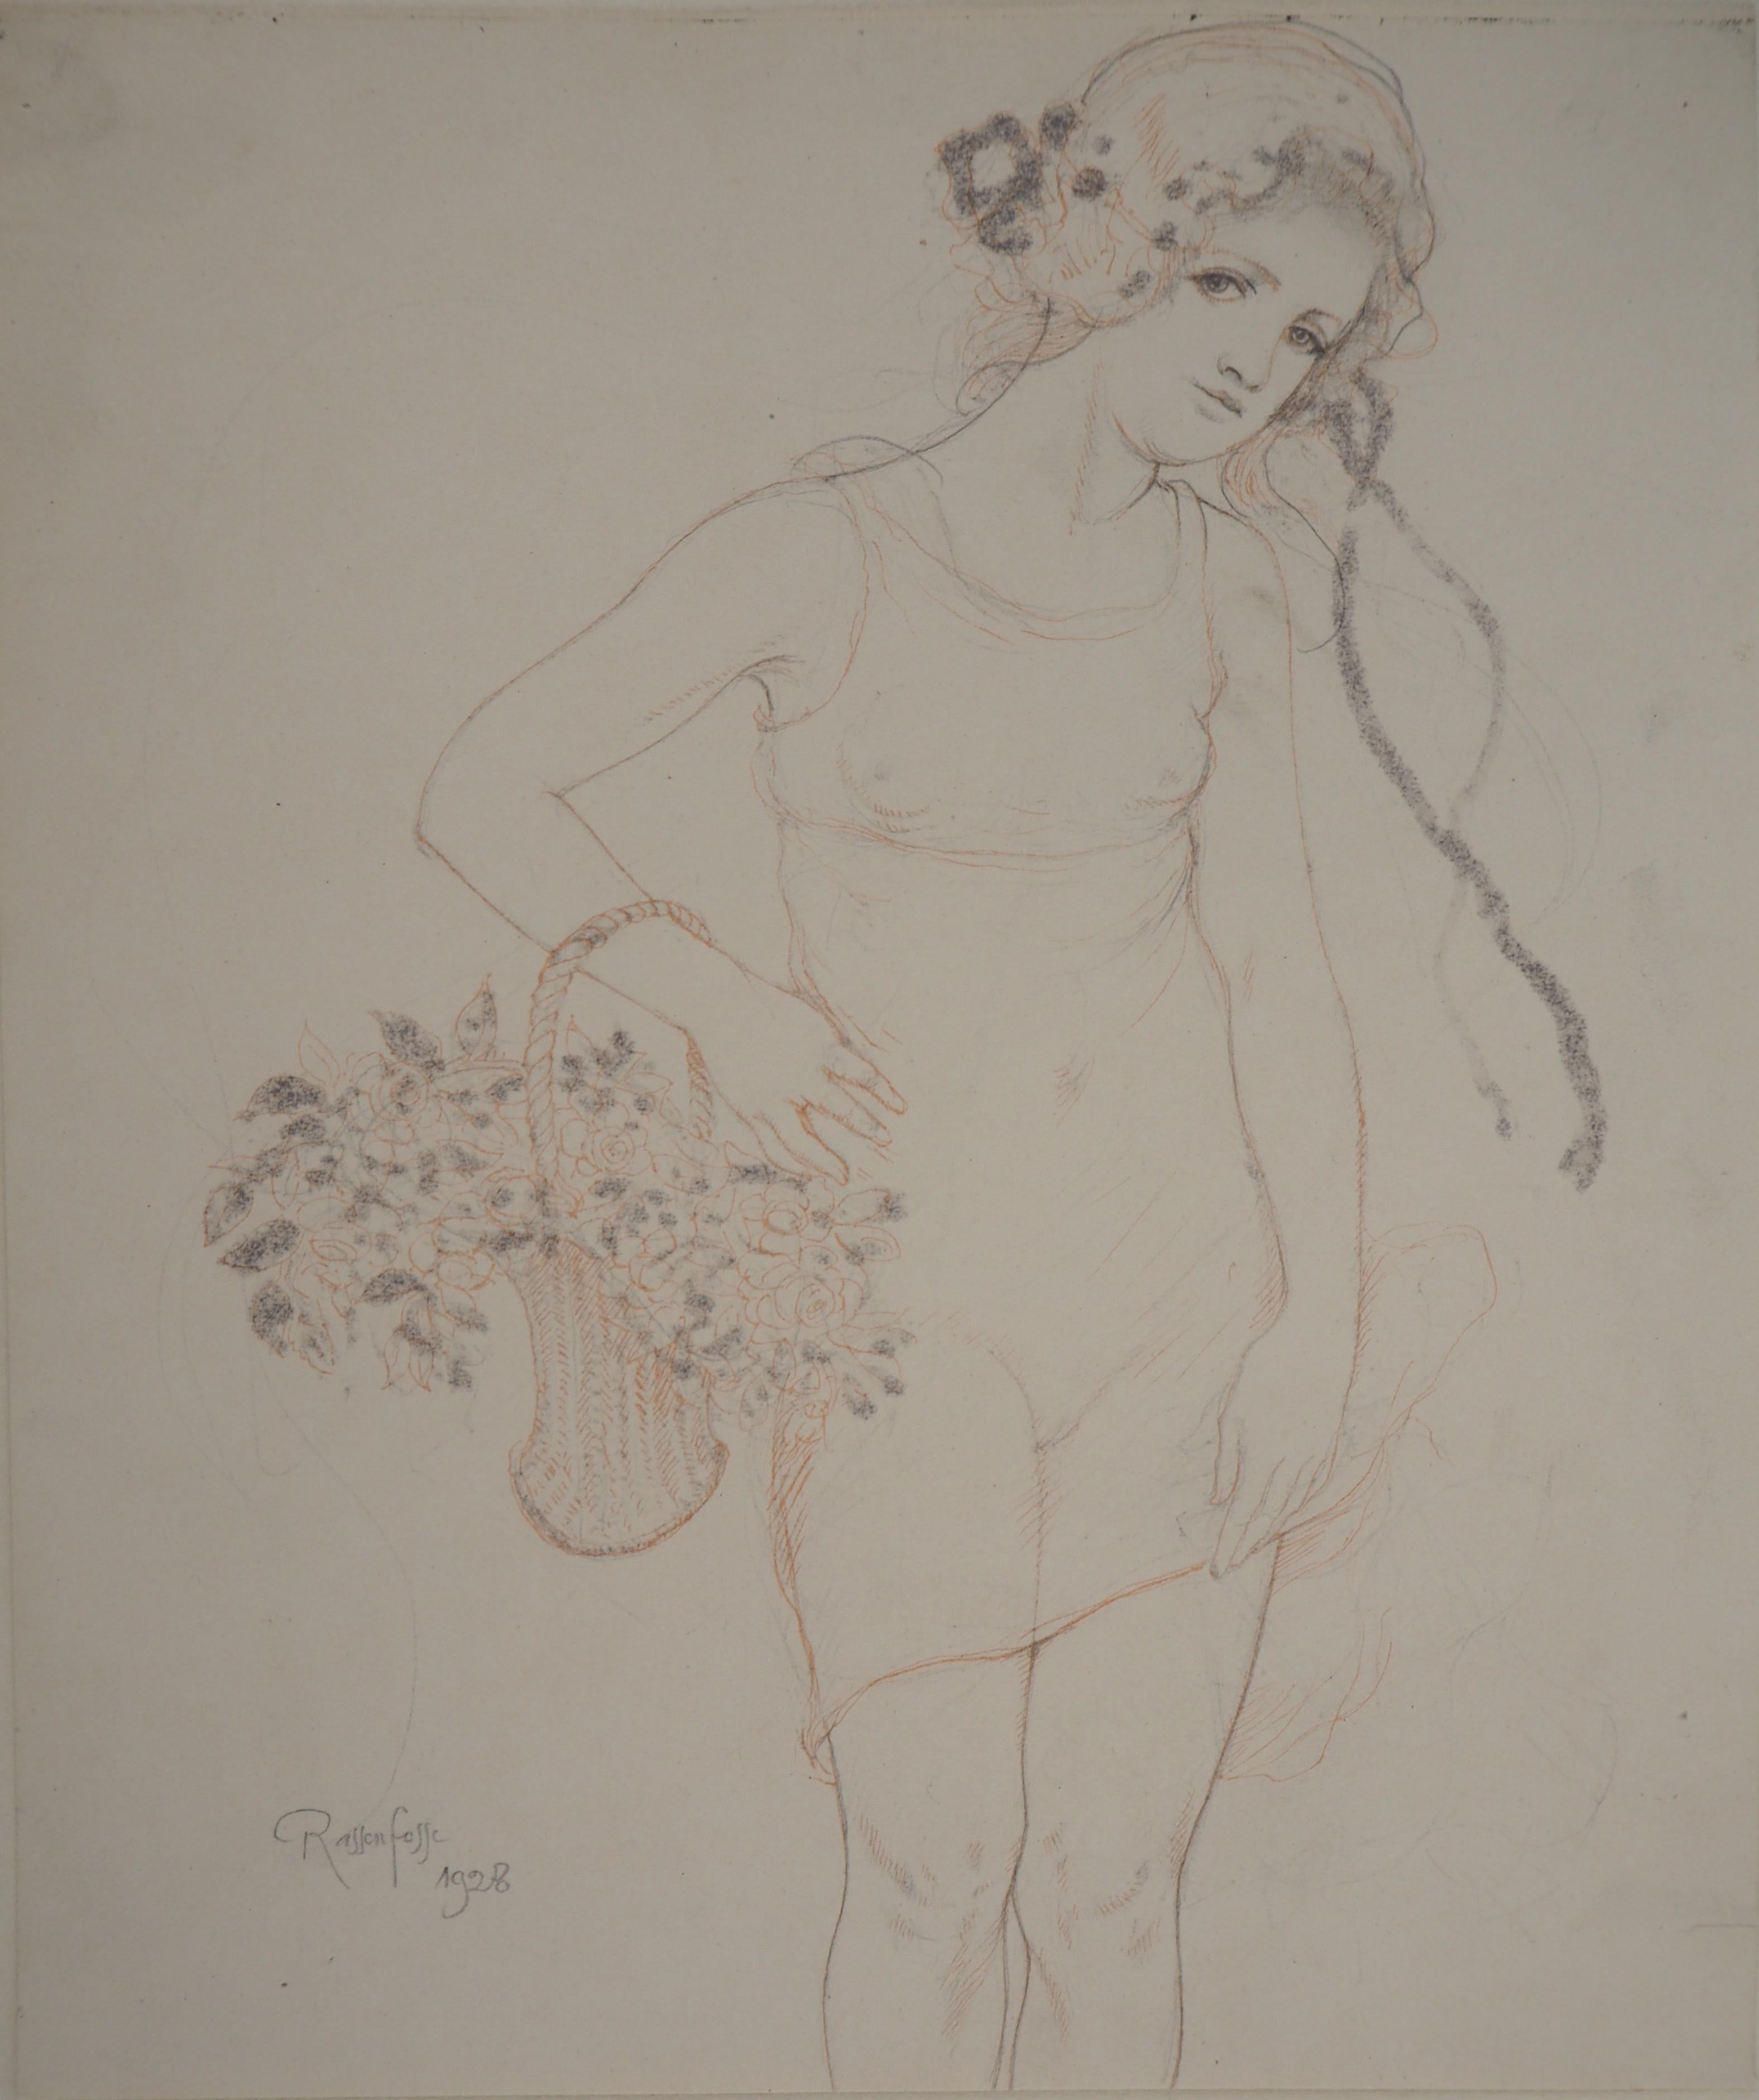 Armand Rassenfosse Figurative Art - Young Girl with Flowers - Original drawing, Handsigned